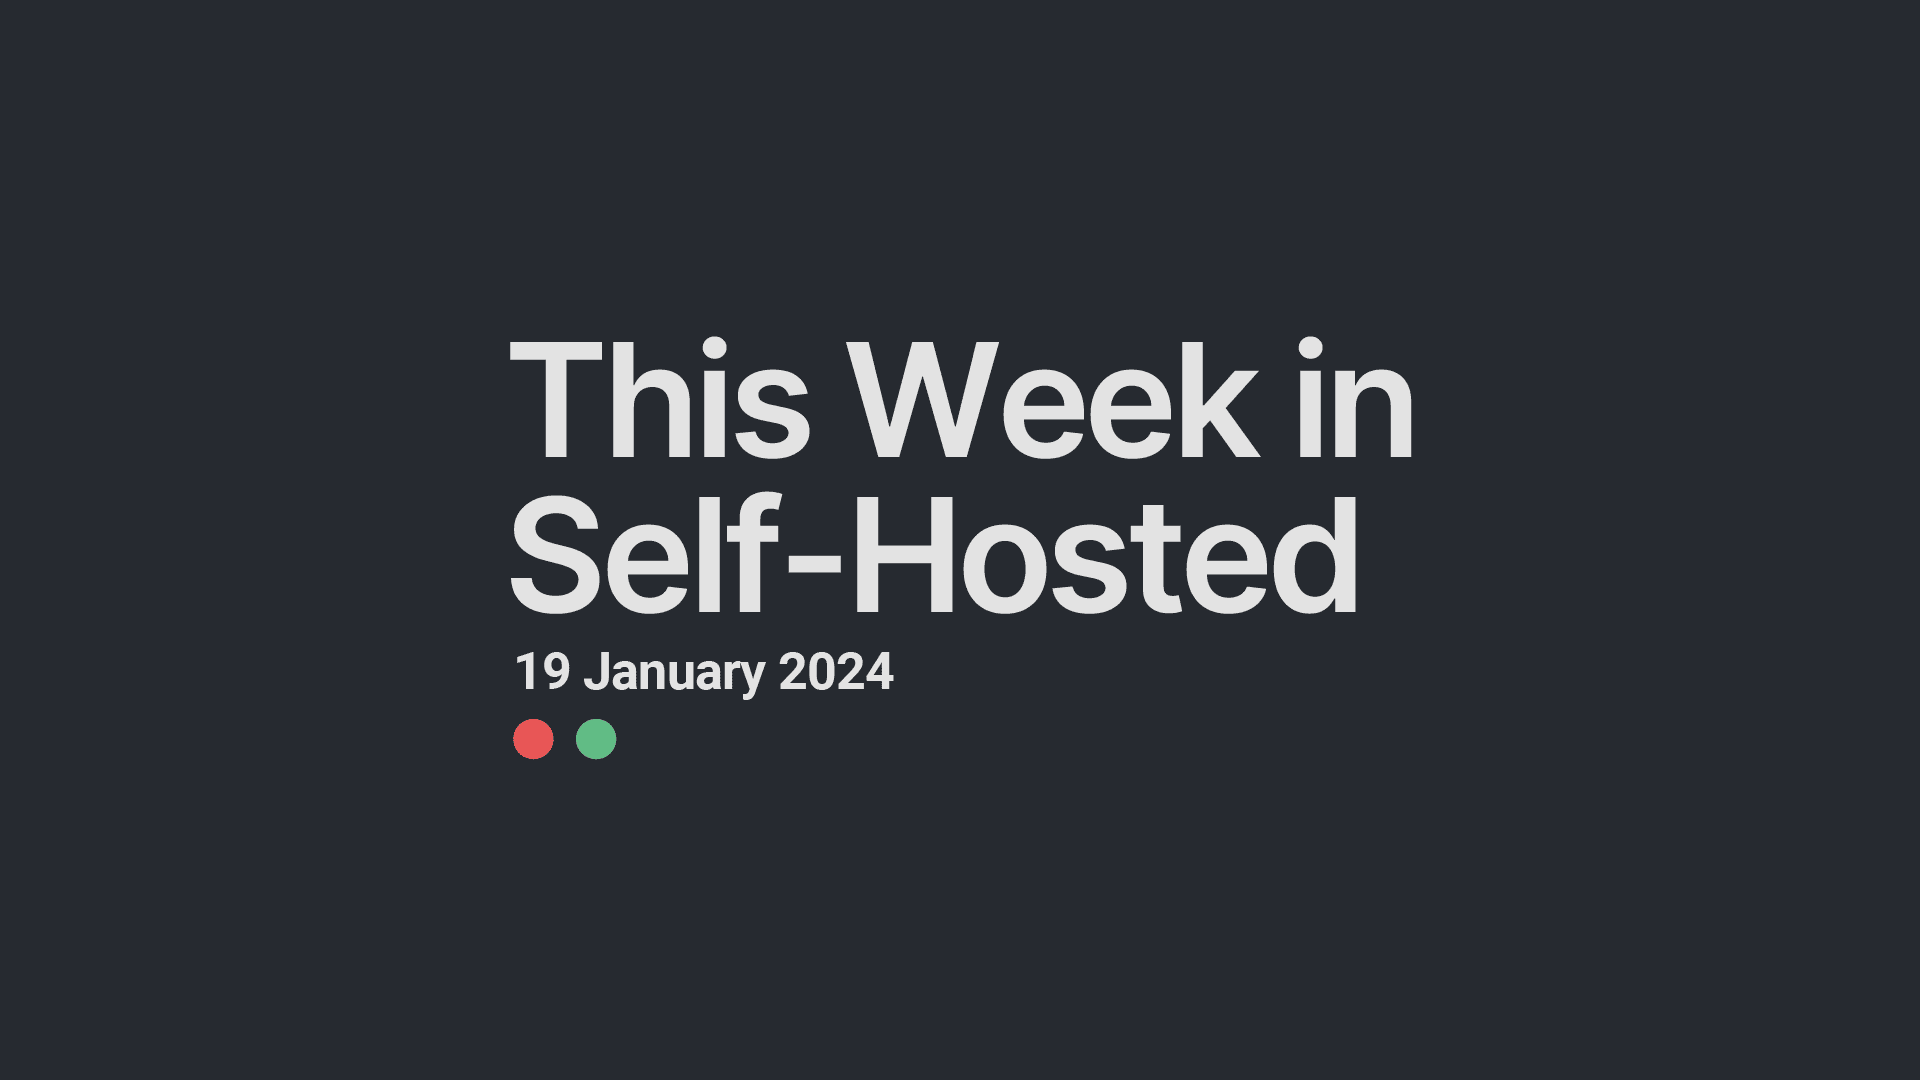 This Week in Self-Hosted (19 January 2024) Post image